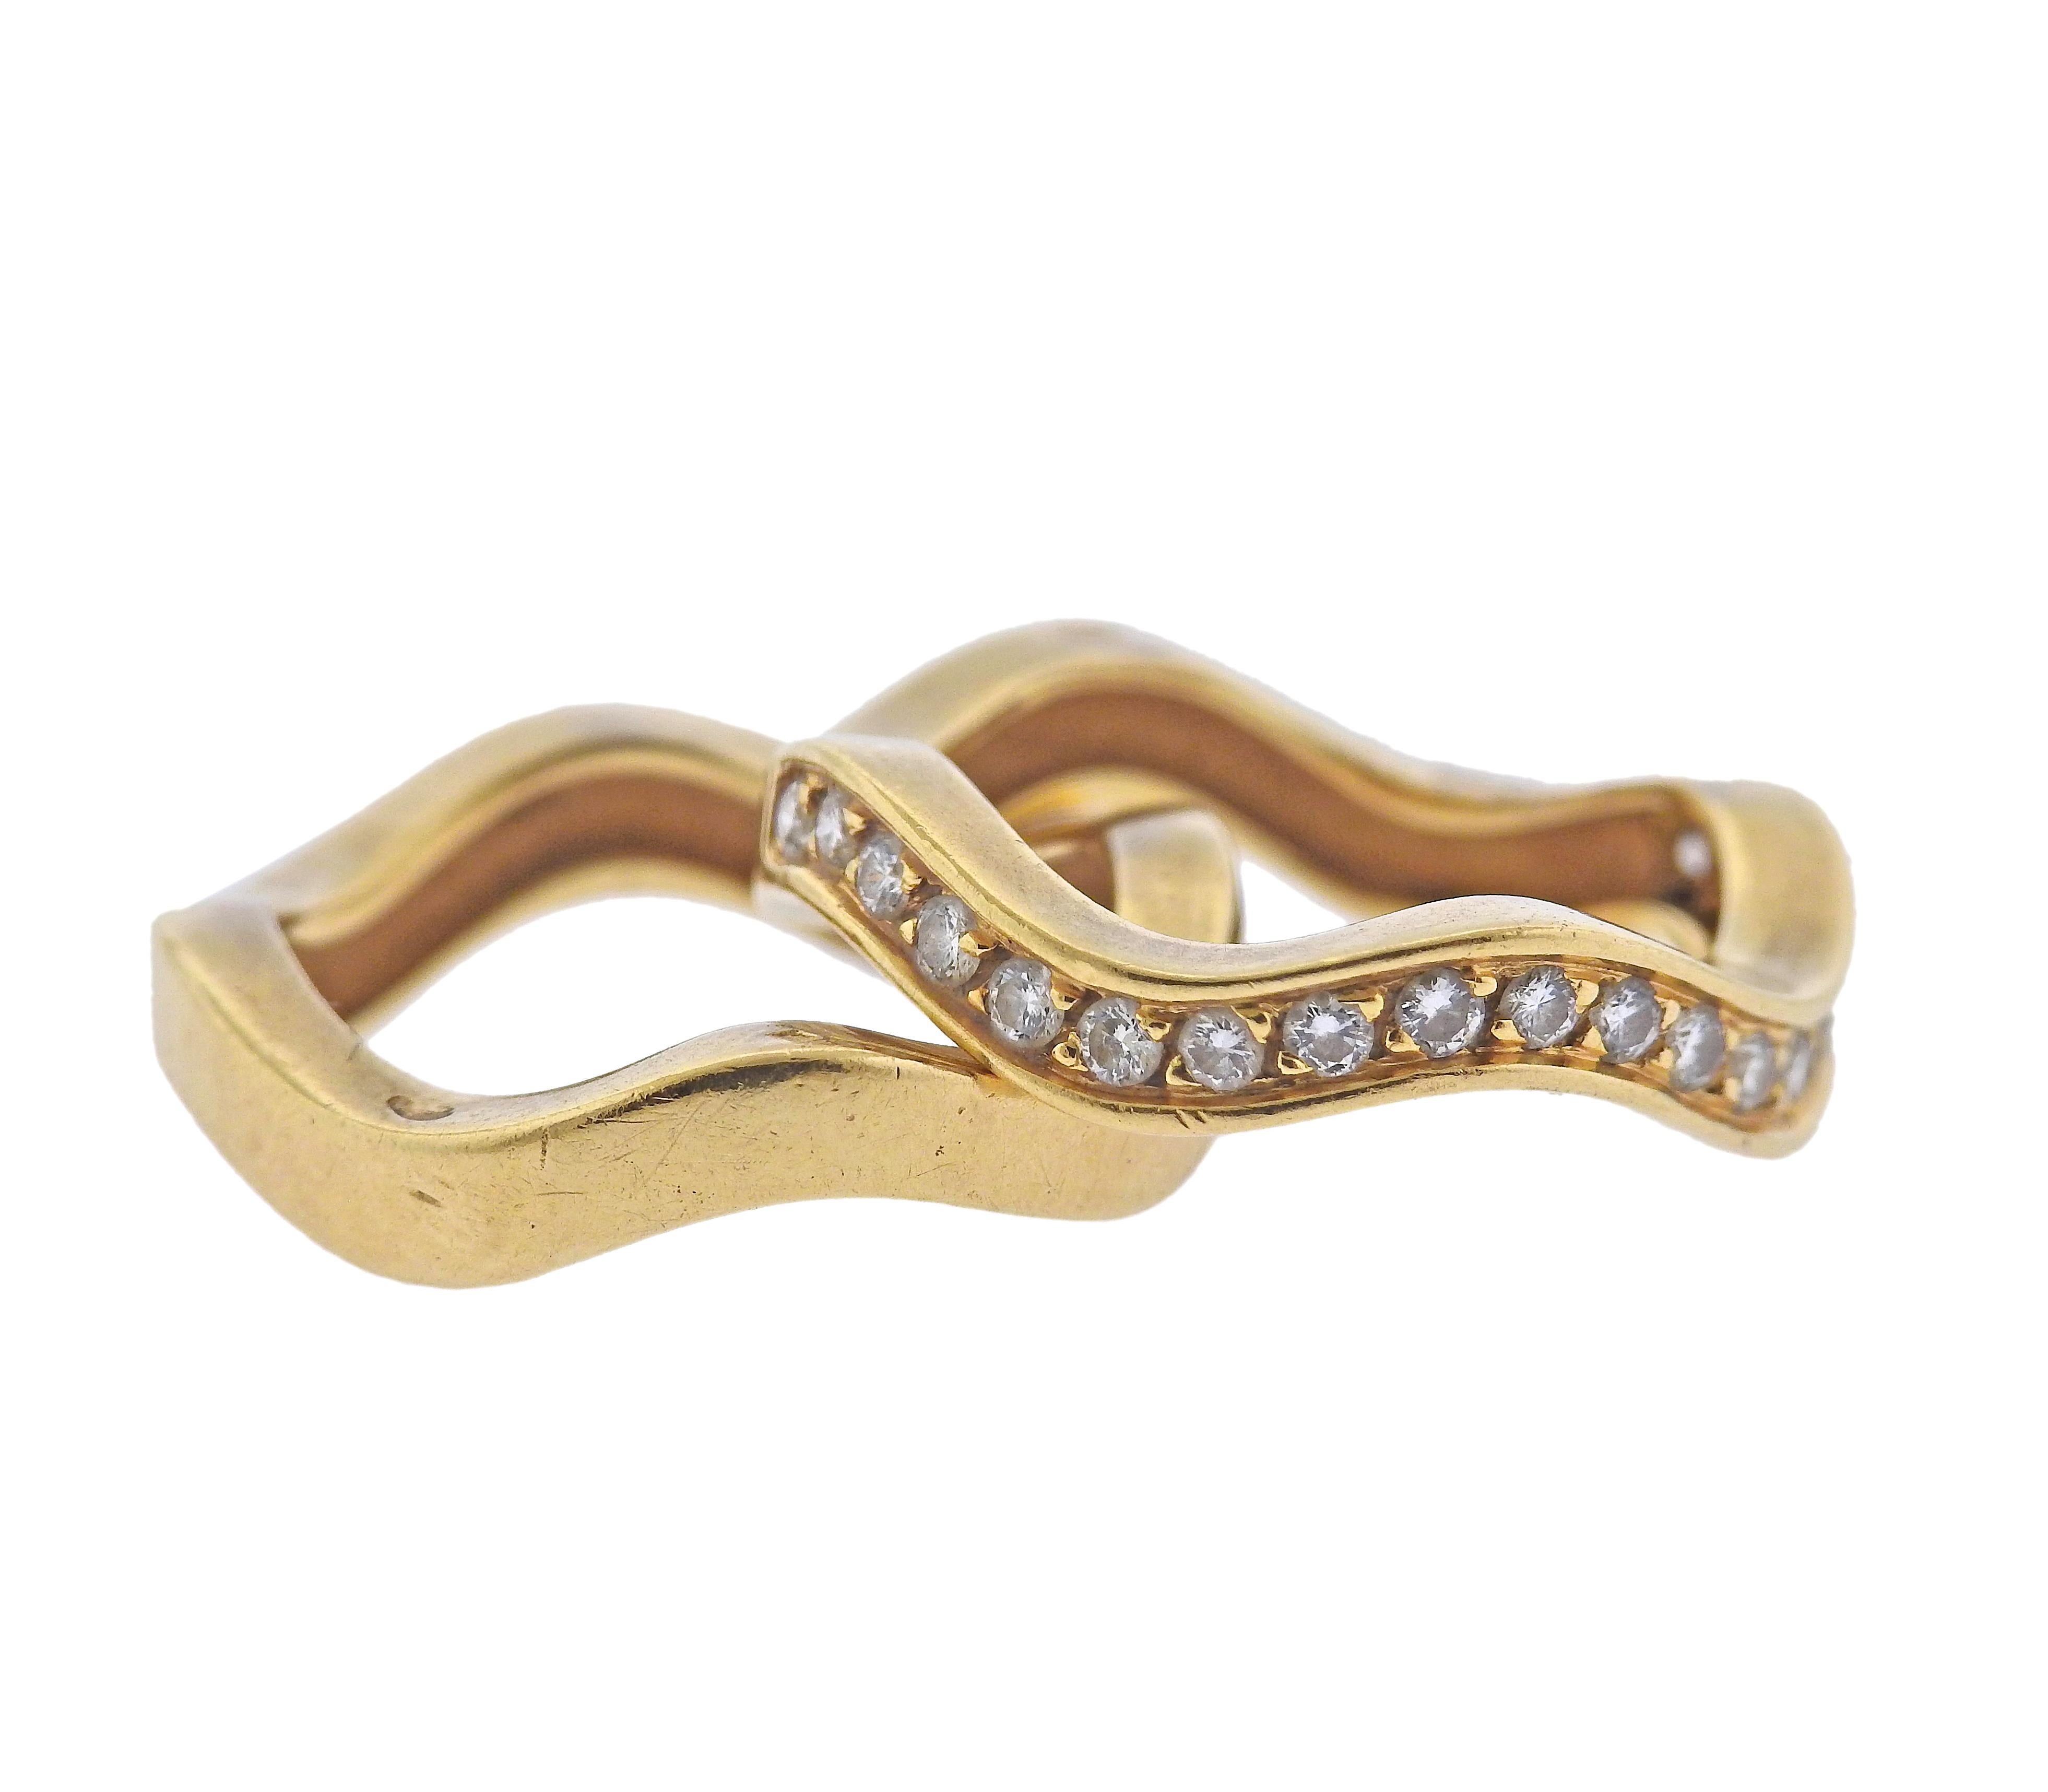 Set of two wave 18k gold band rings by Cartier, one set with approx. 0.38ctw G/VS in diamonds. Ring sizes - 5.25 each, each band is 3mm wide. Marked with French marks, 750, Cartier. Weight - 9.7 grams.